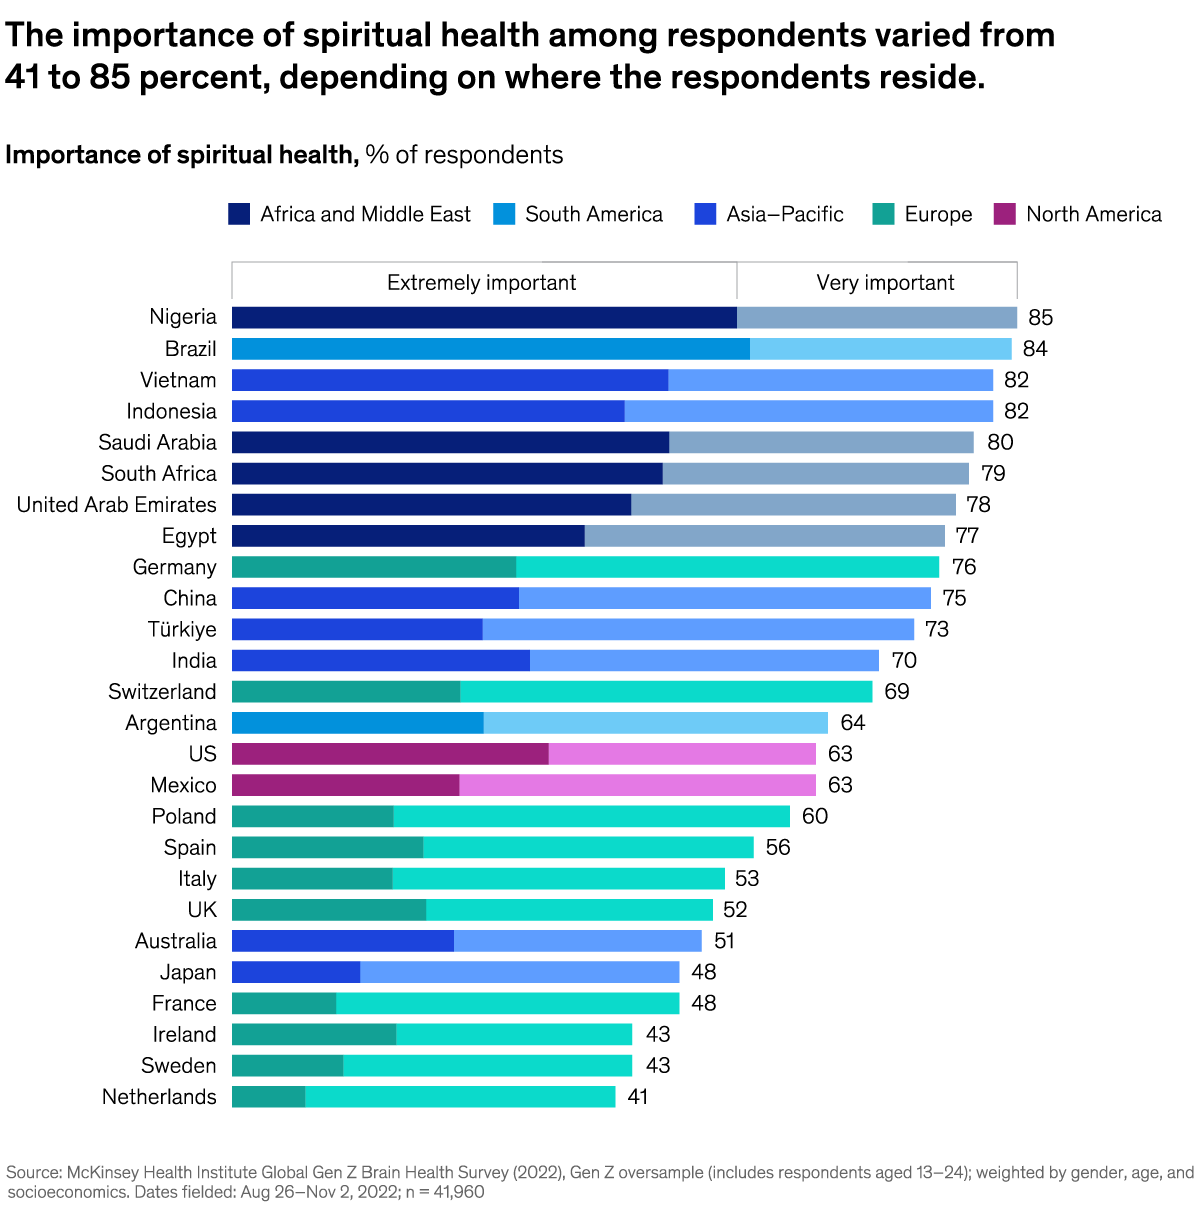 A chart titled “The importance of spiritual health among respondents varied from 41 to 85 percent, depending on where the respondents reside.” Click to open the full article on McKinsey.com.